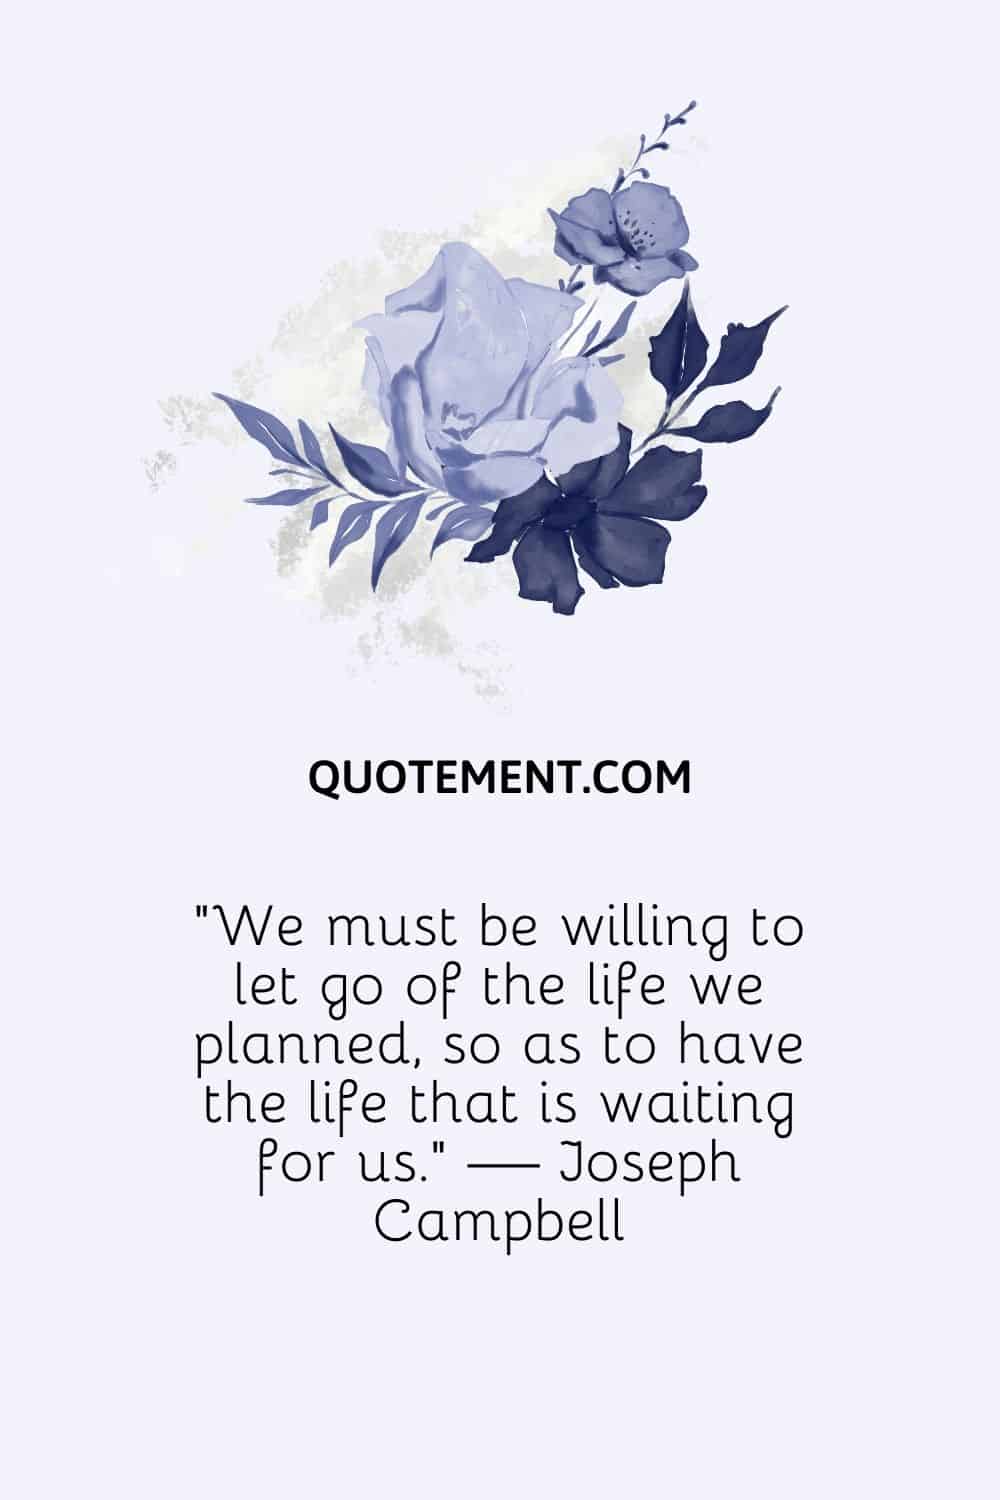 We must be willing to let go of the life we planned